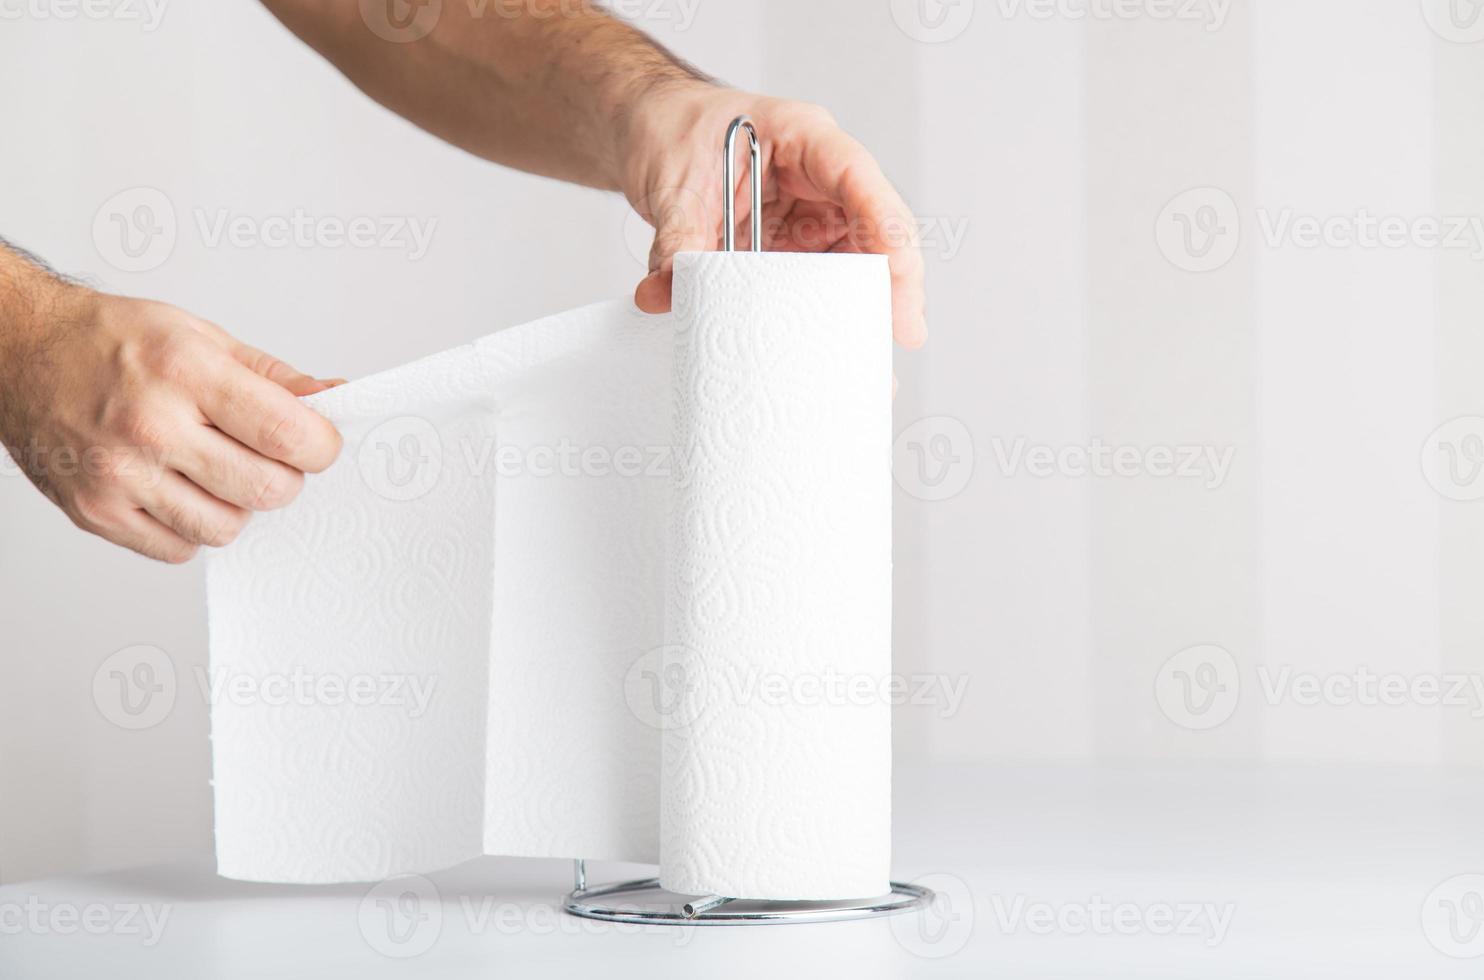 an anonymous hand is tearing off paper towel, hygiene concept copy space includes. photo